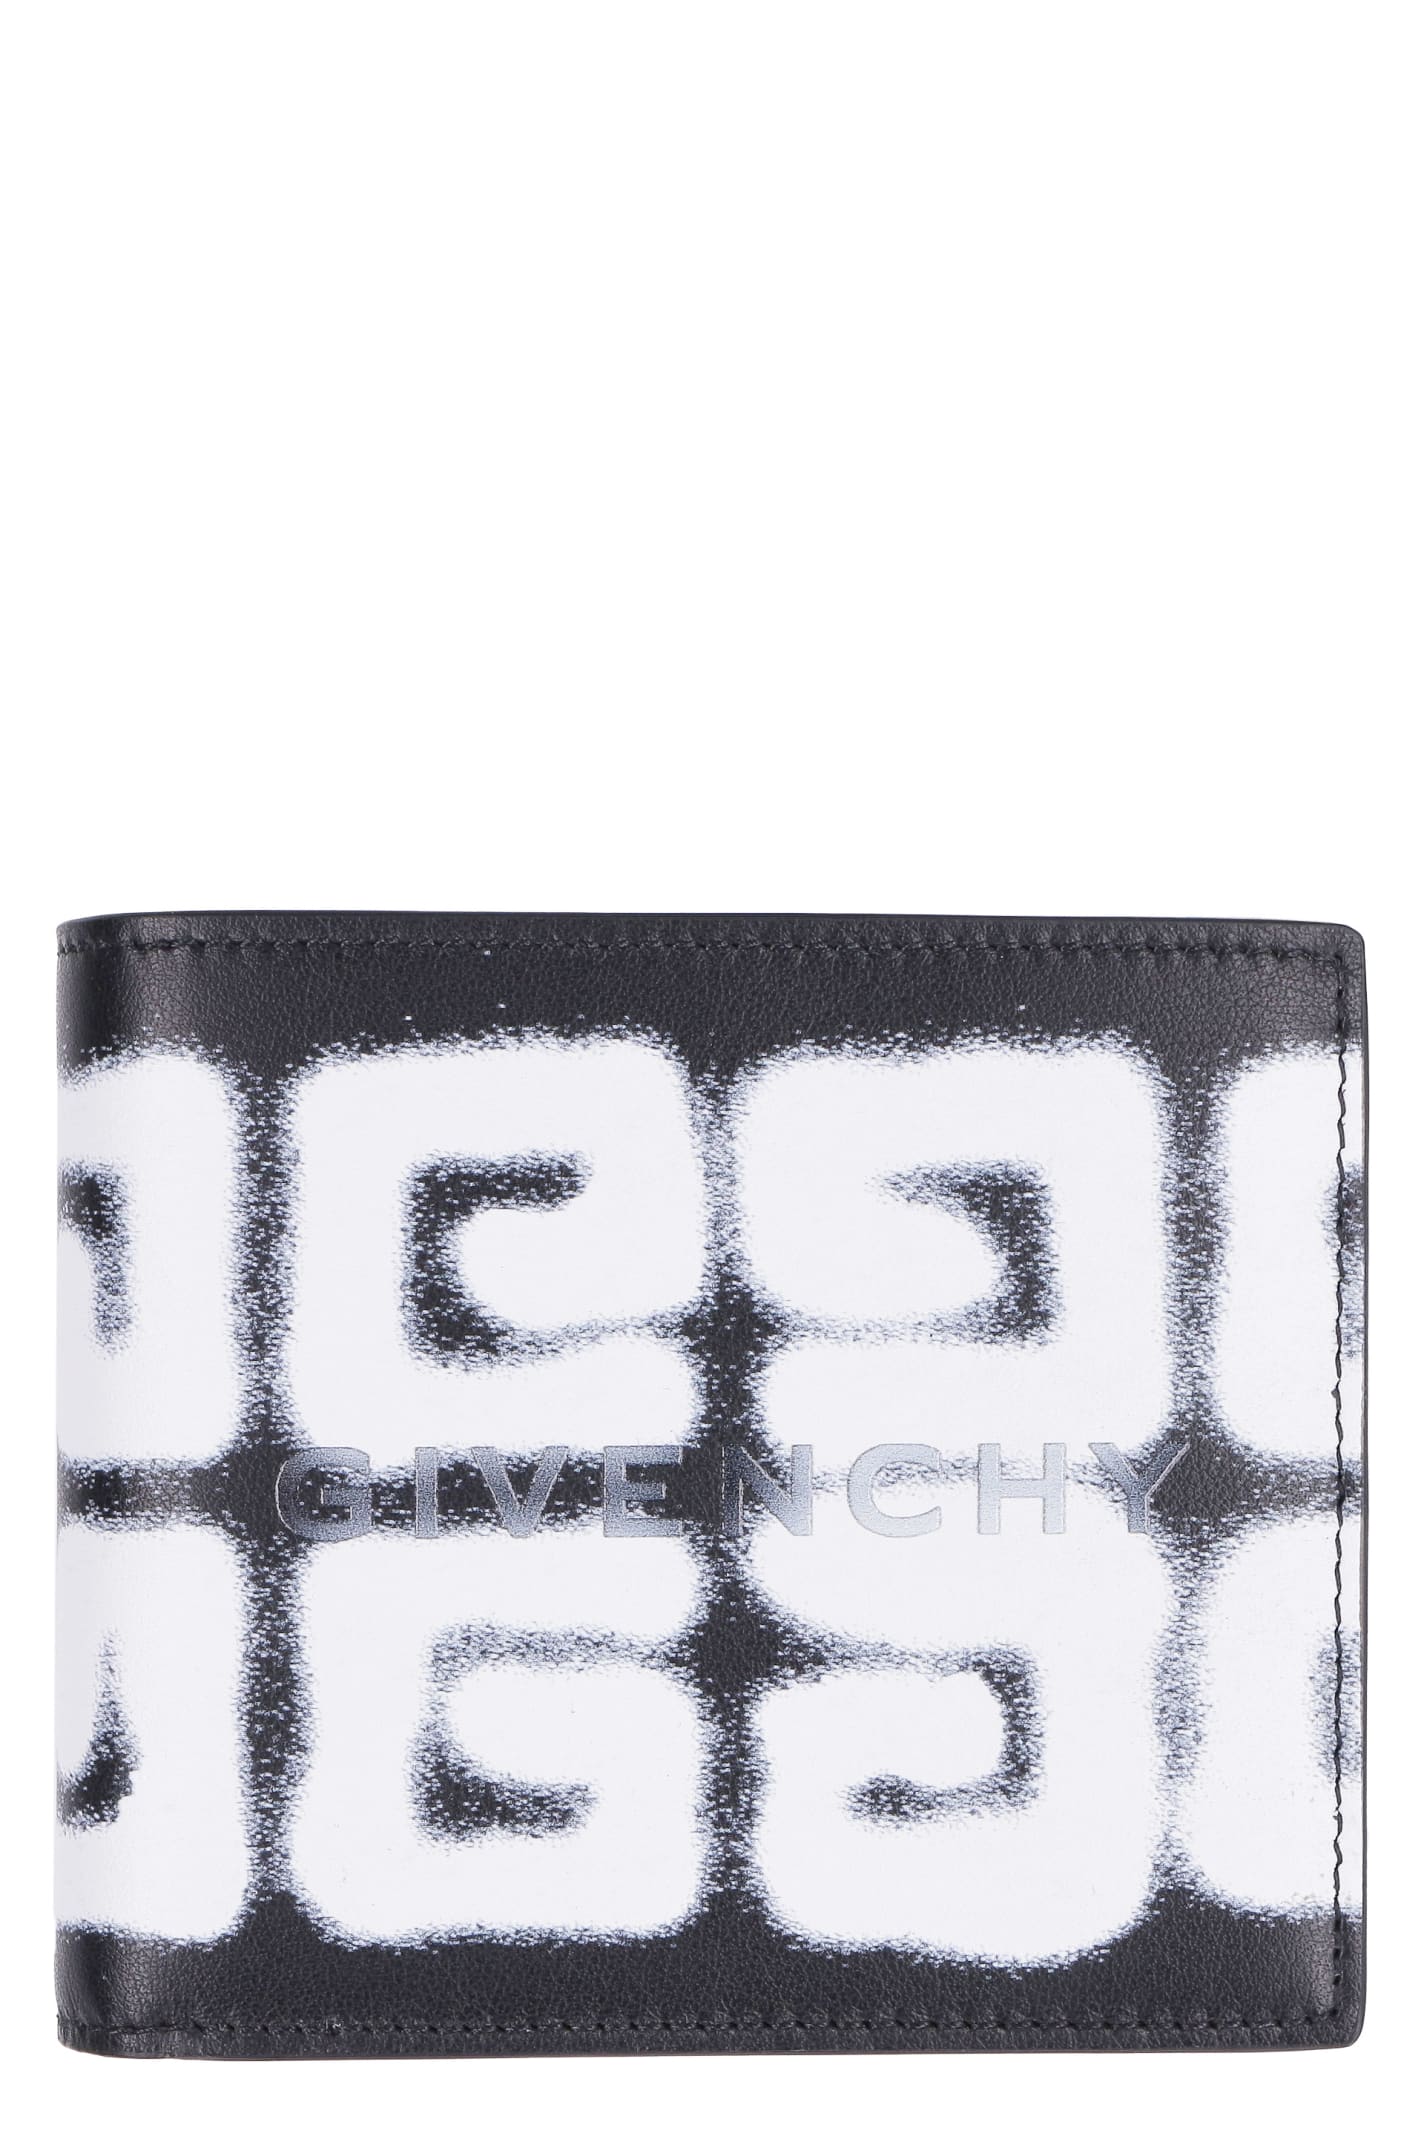 Givenchy Chito X Givenchy - Printed Leather Wallet